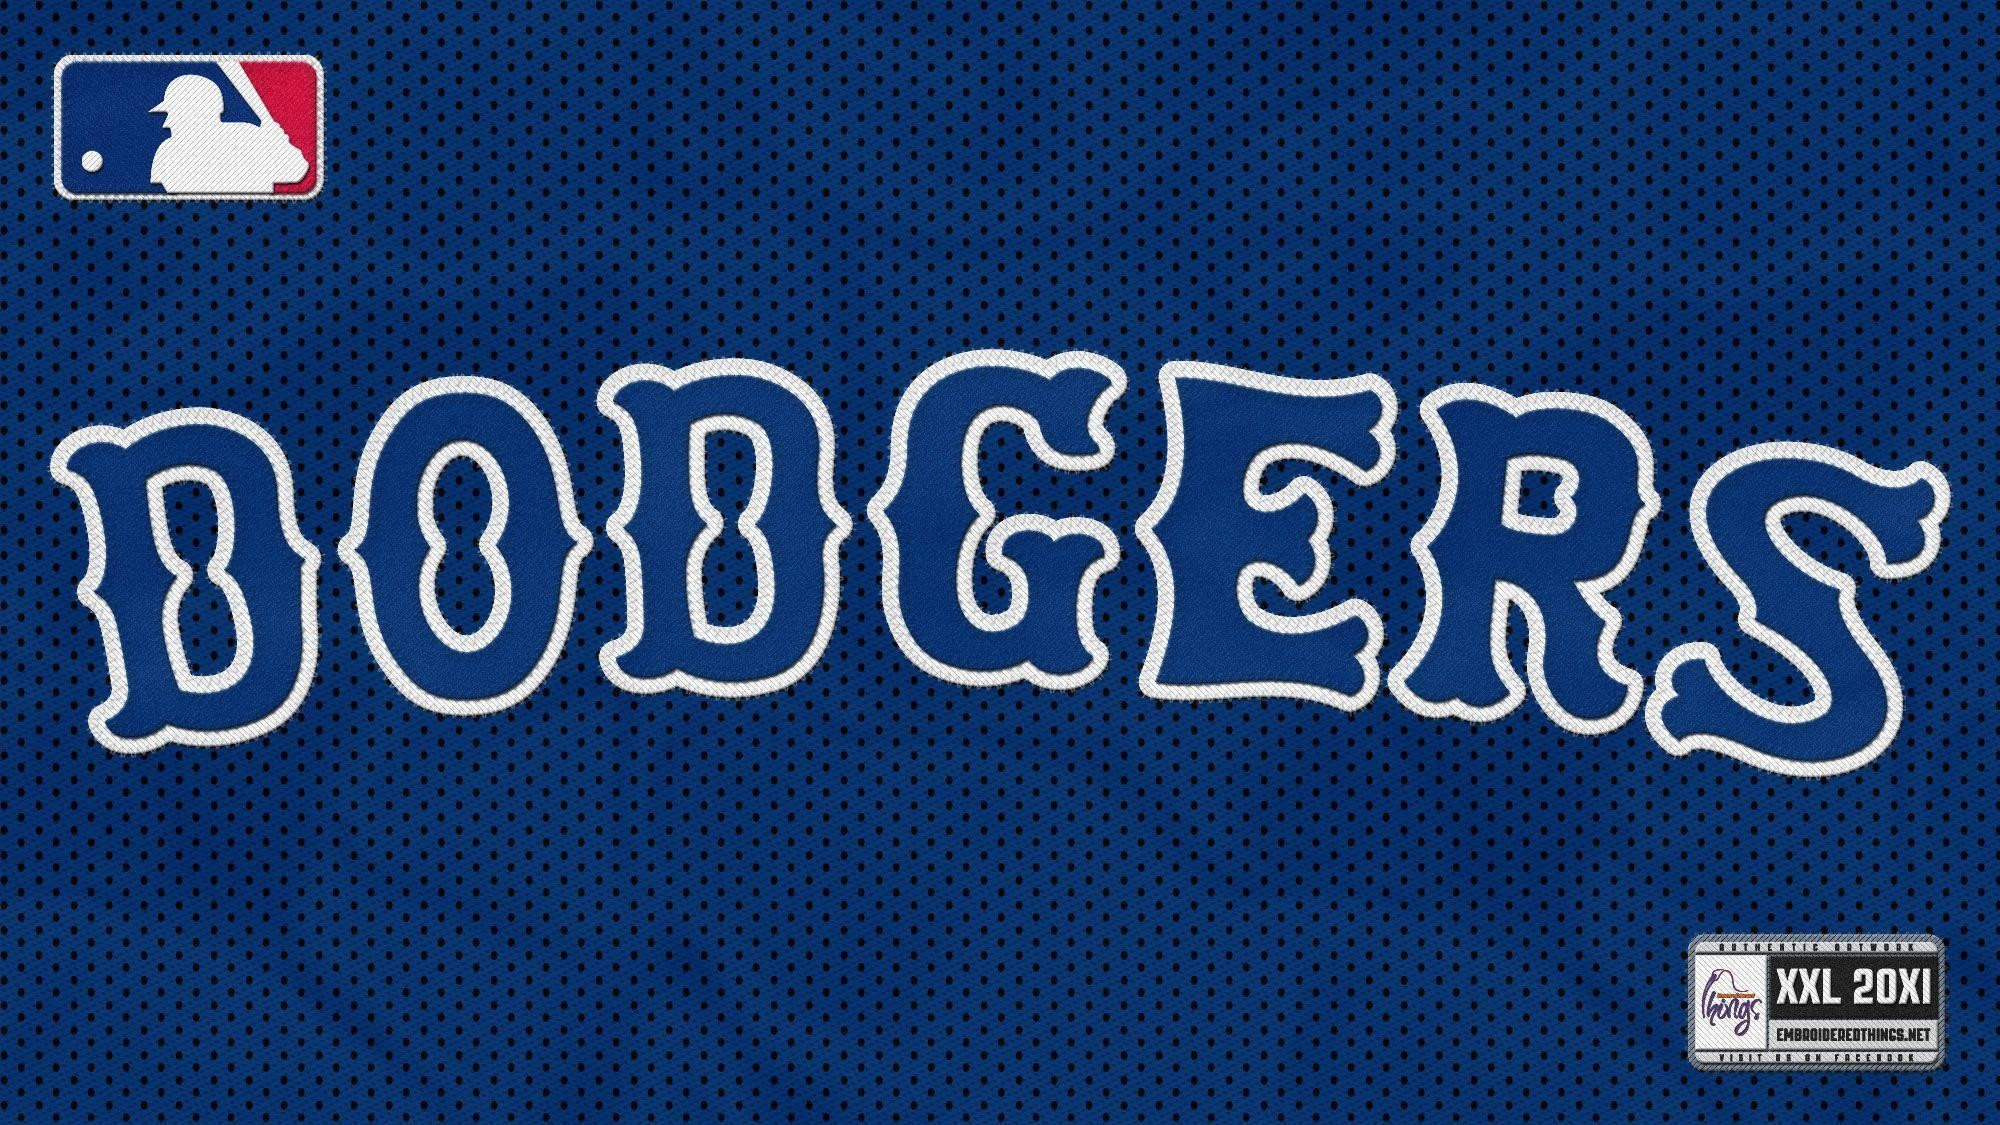 2000x1125 Los Angeles Dodgers wallpapers | Los Angeles Dodgers background .